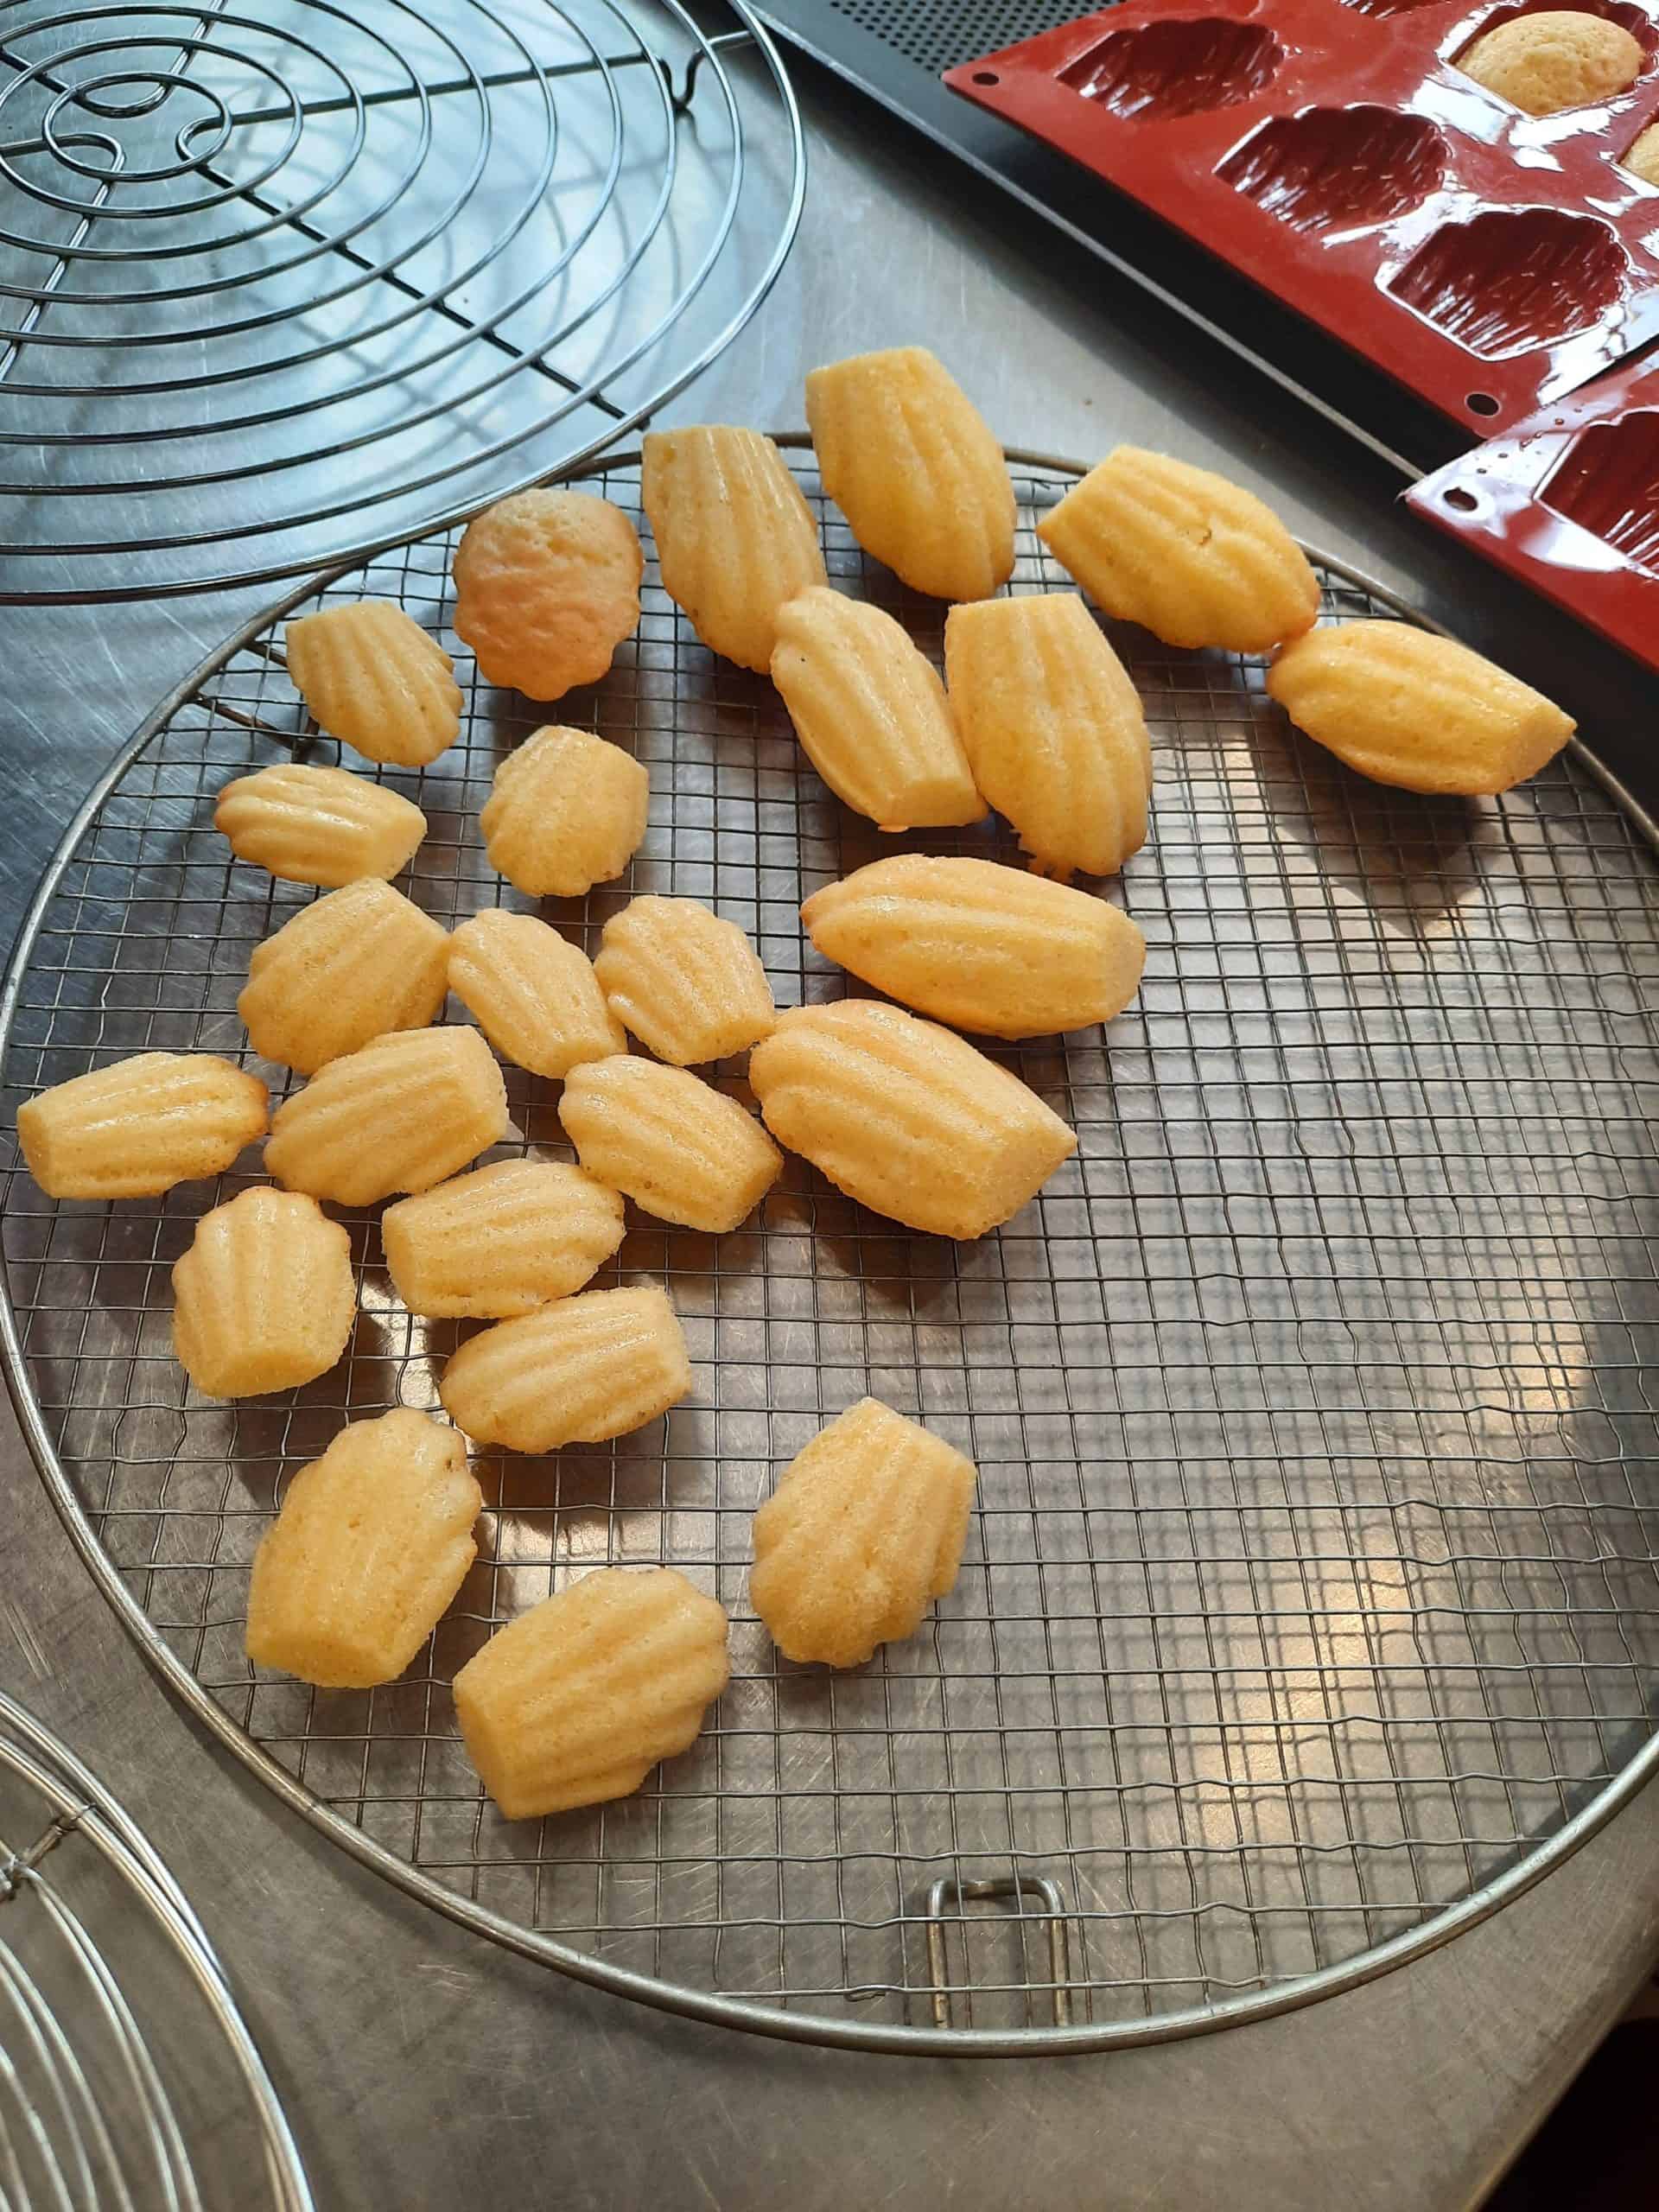 Unmold the madeleines and let cool on a wire rack after baking